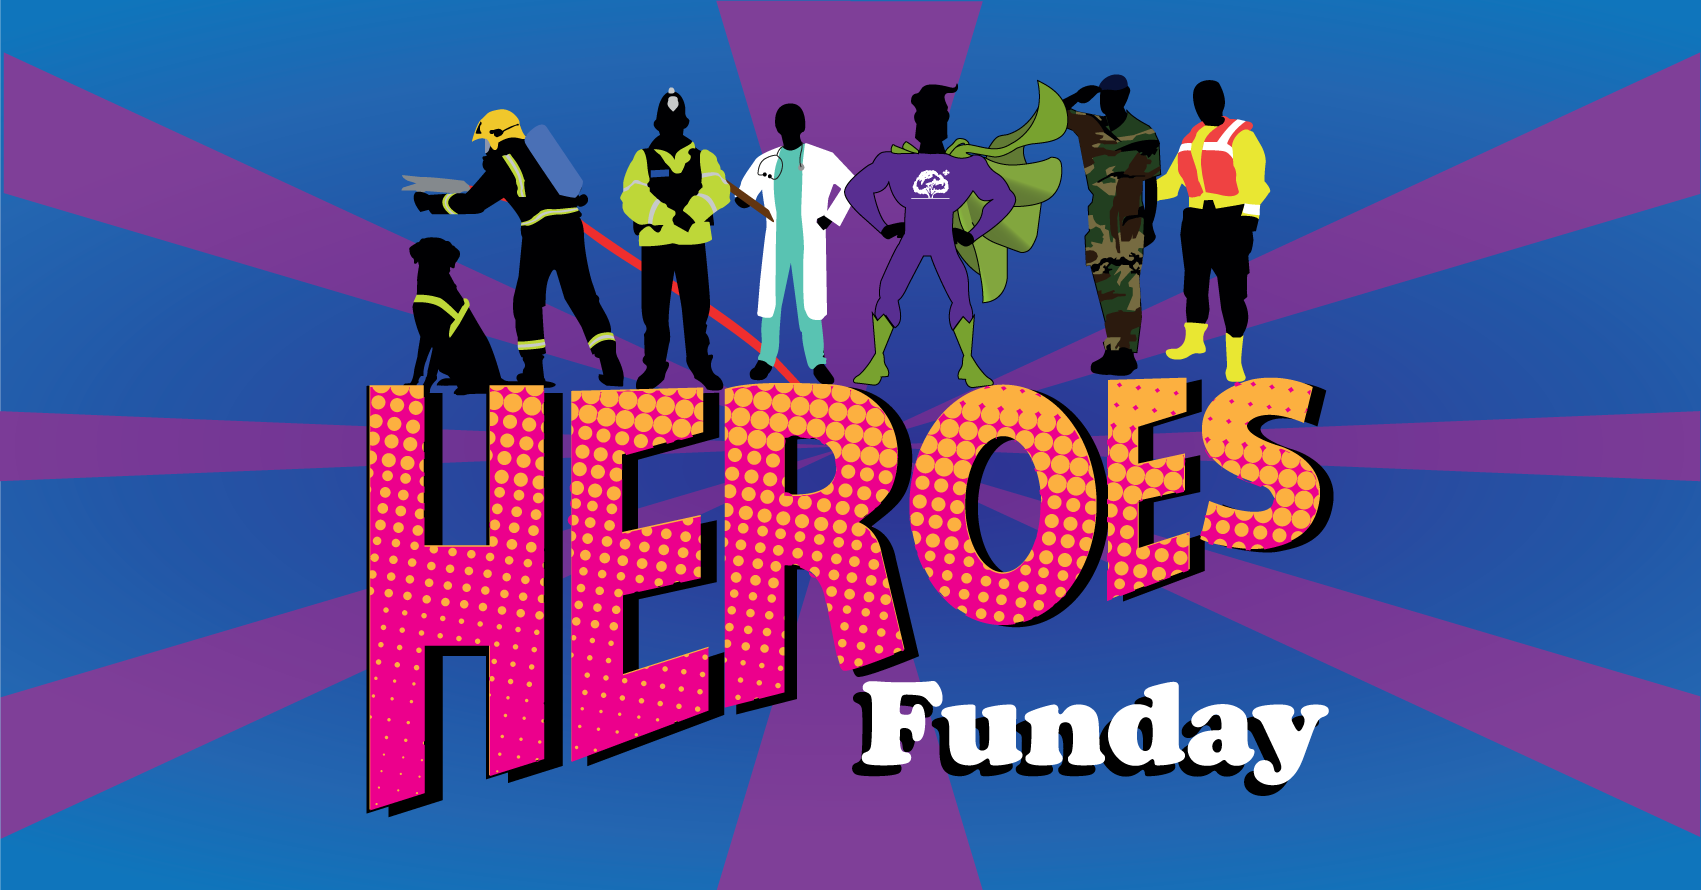 Heroes Funday